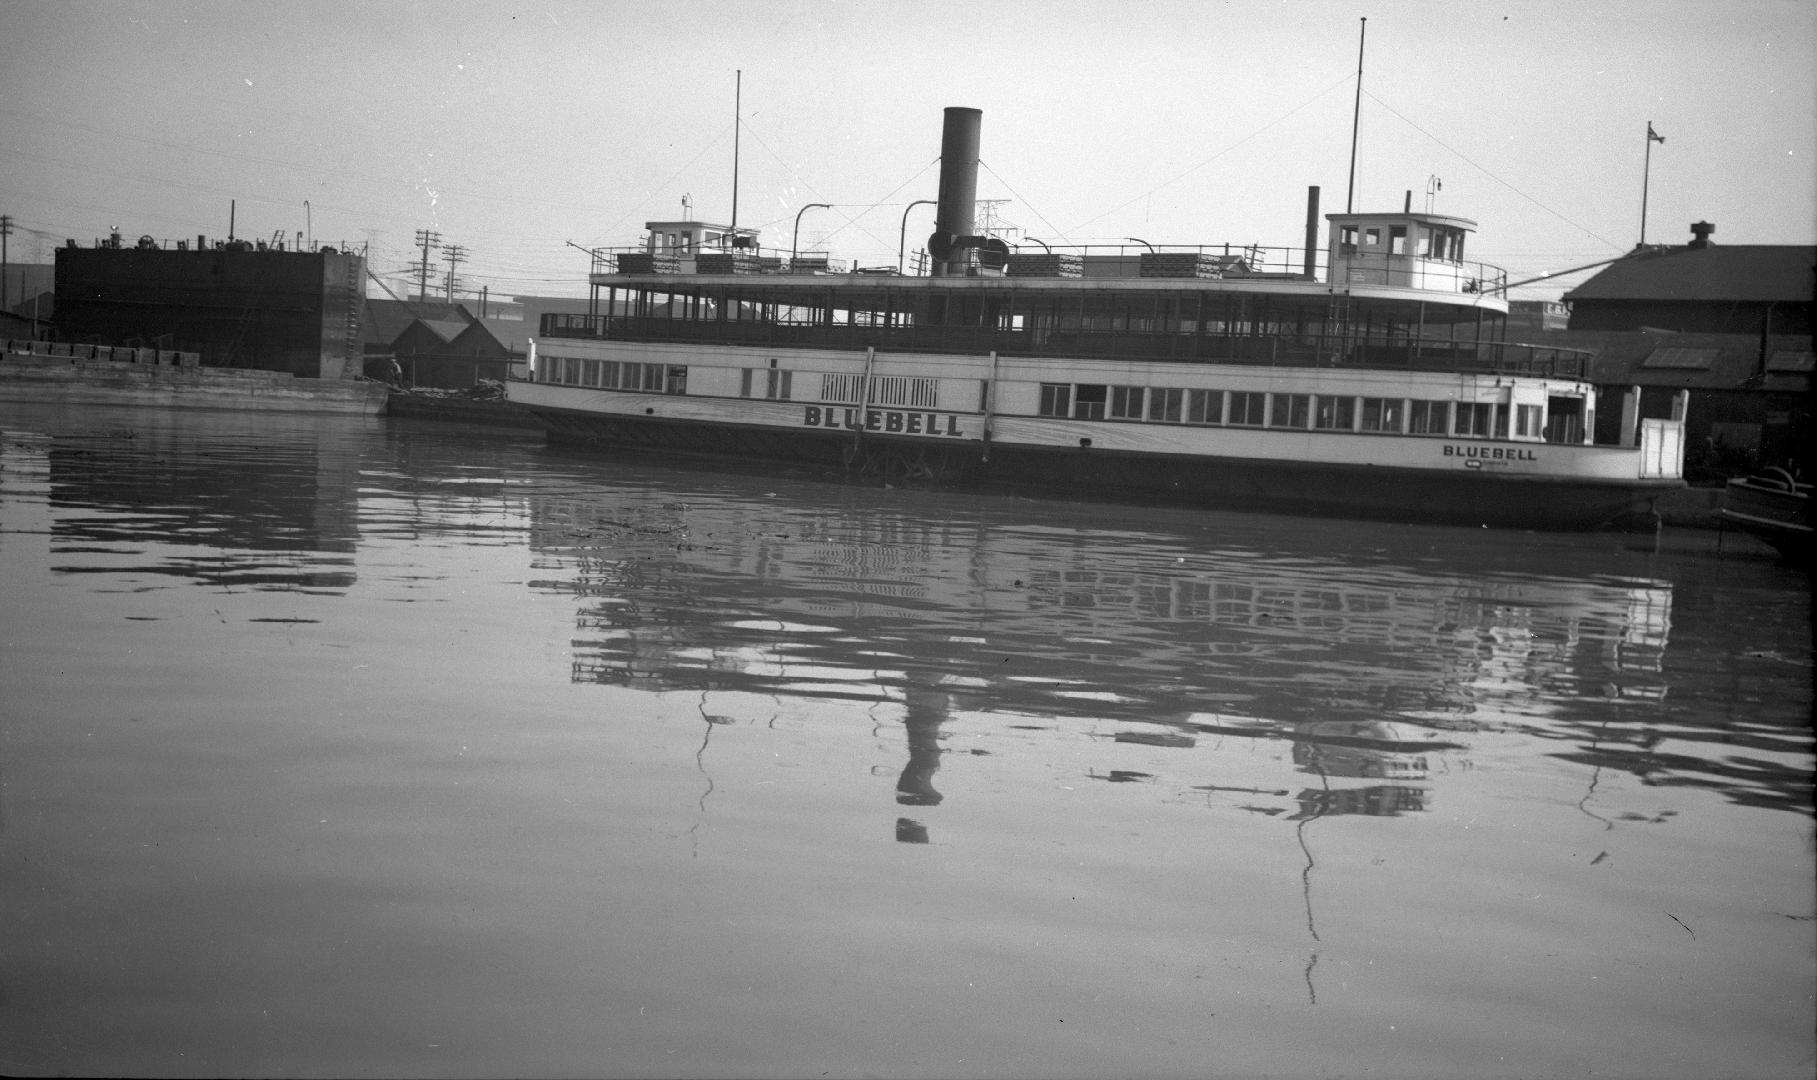 Image shows a ferry at the wharf.